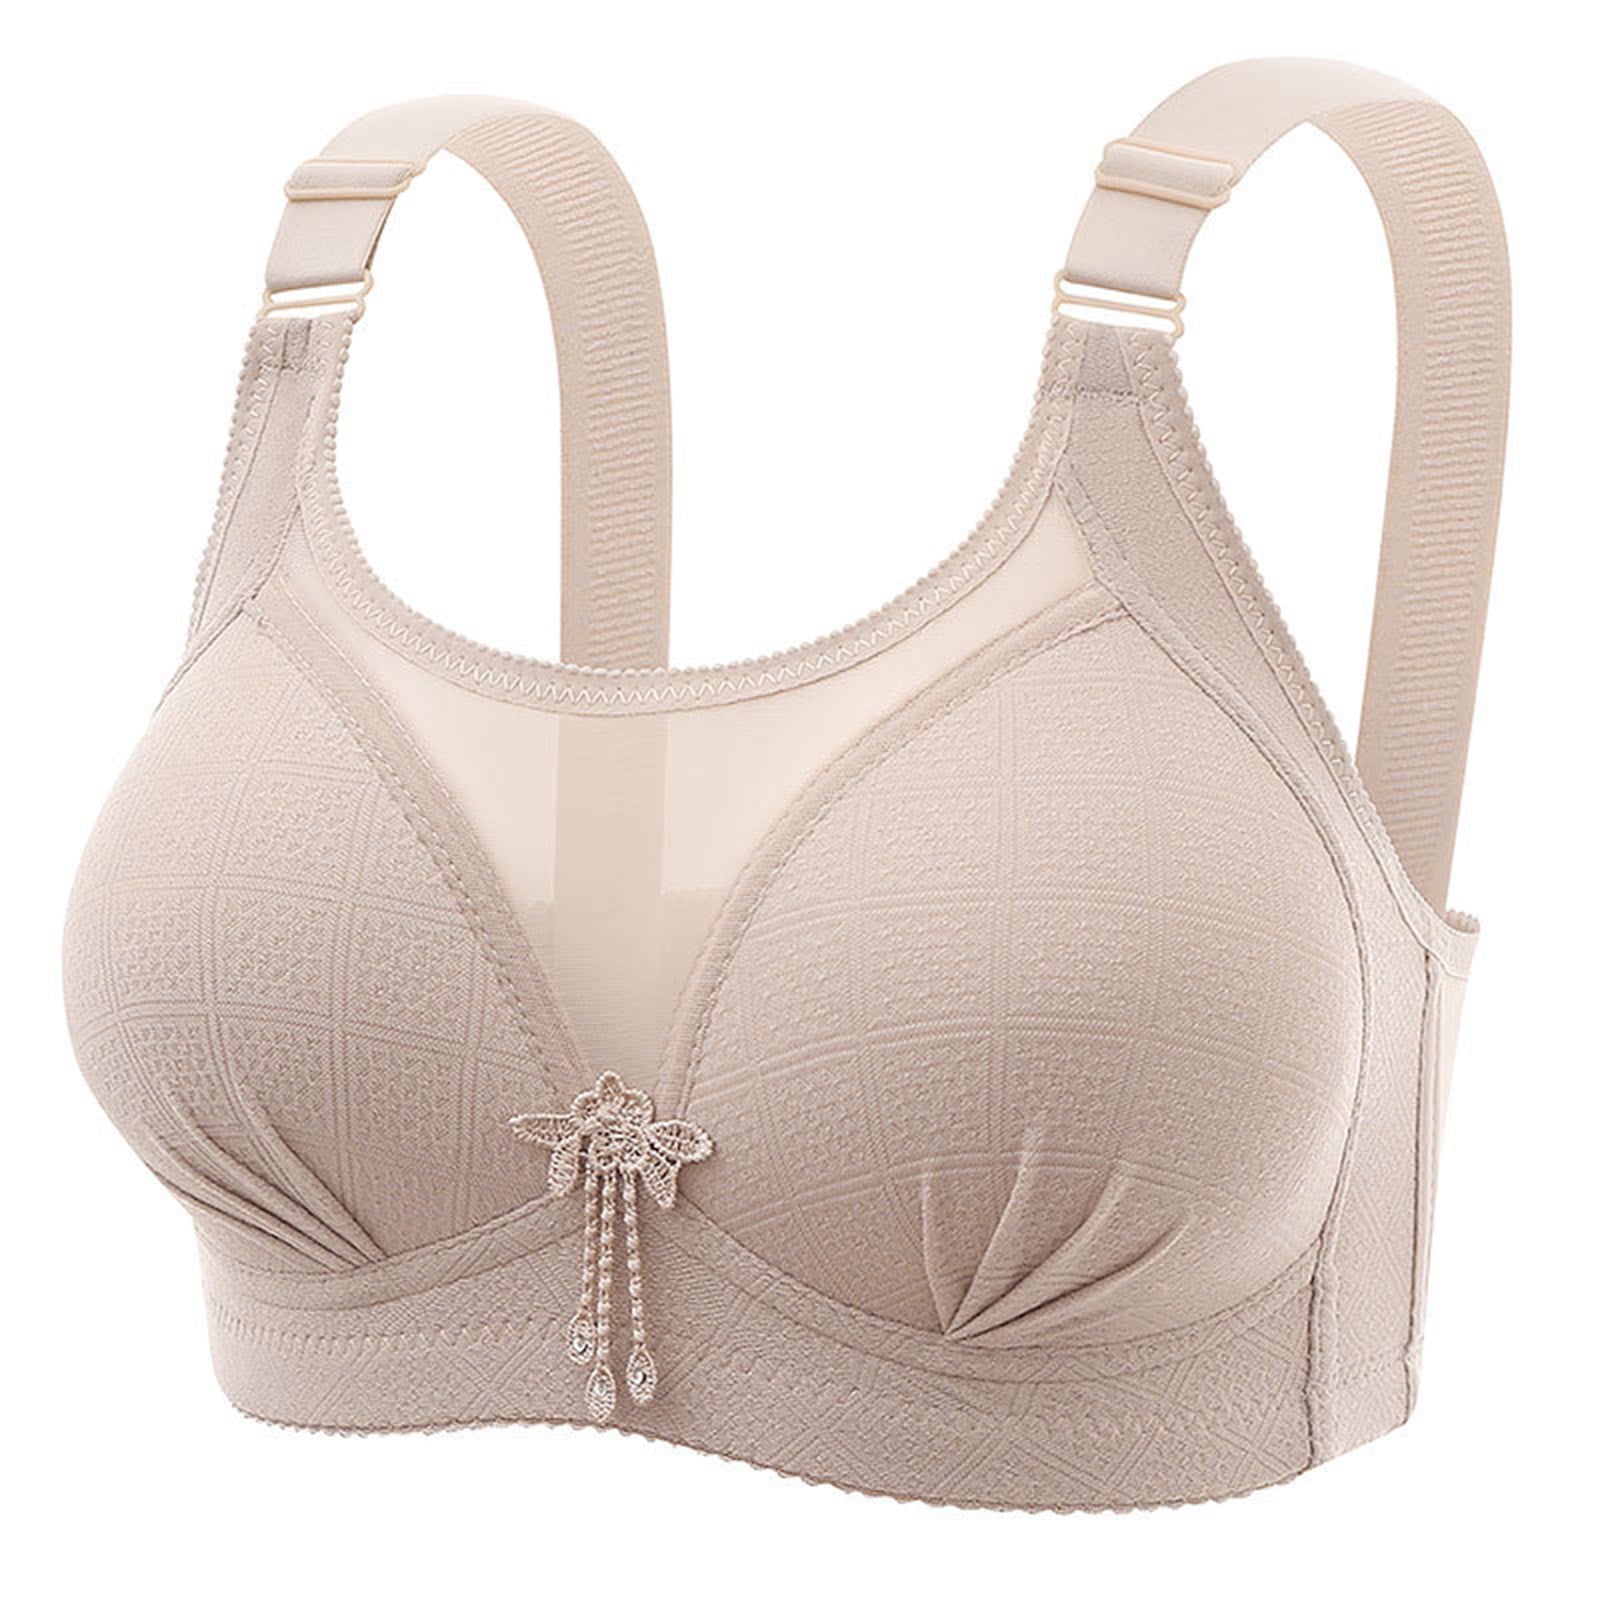 Bra NEW - clothing & accessories - by owner - apparel sale - craigslist